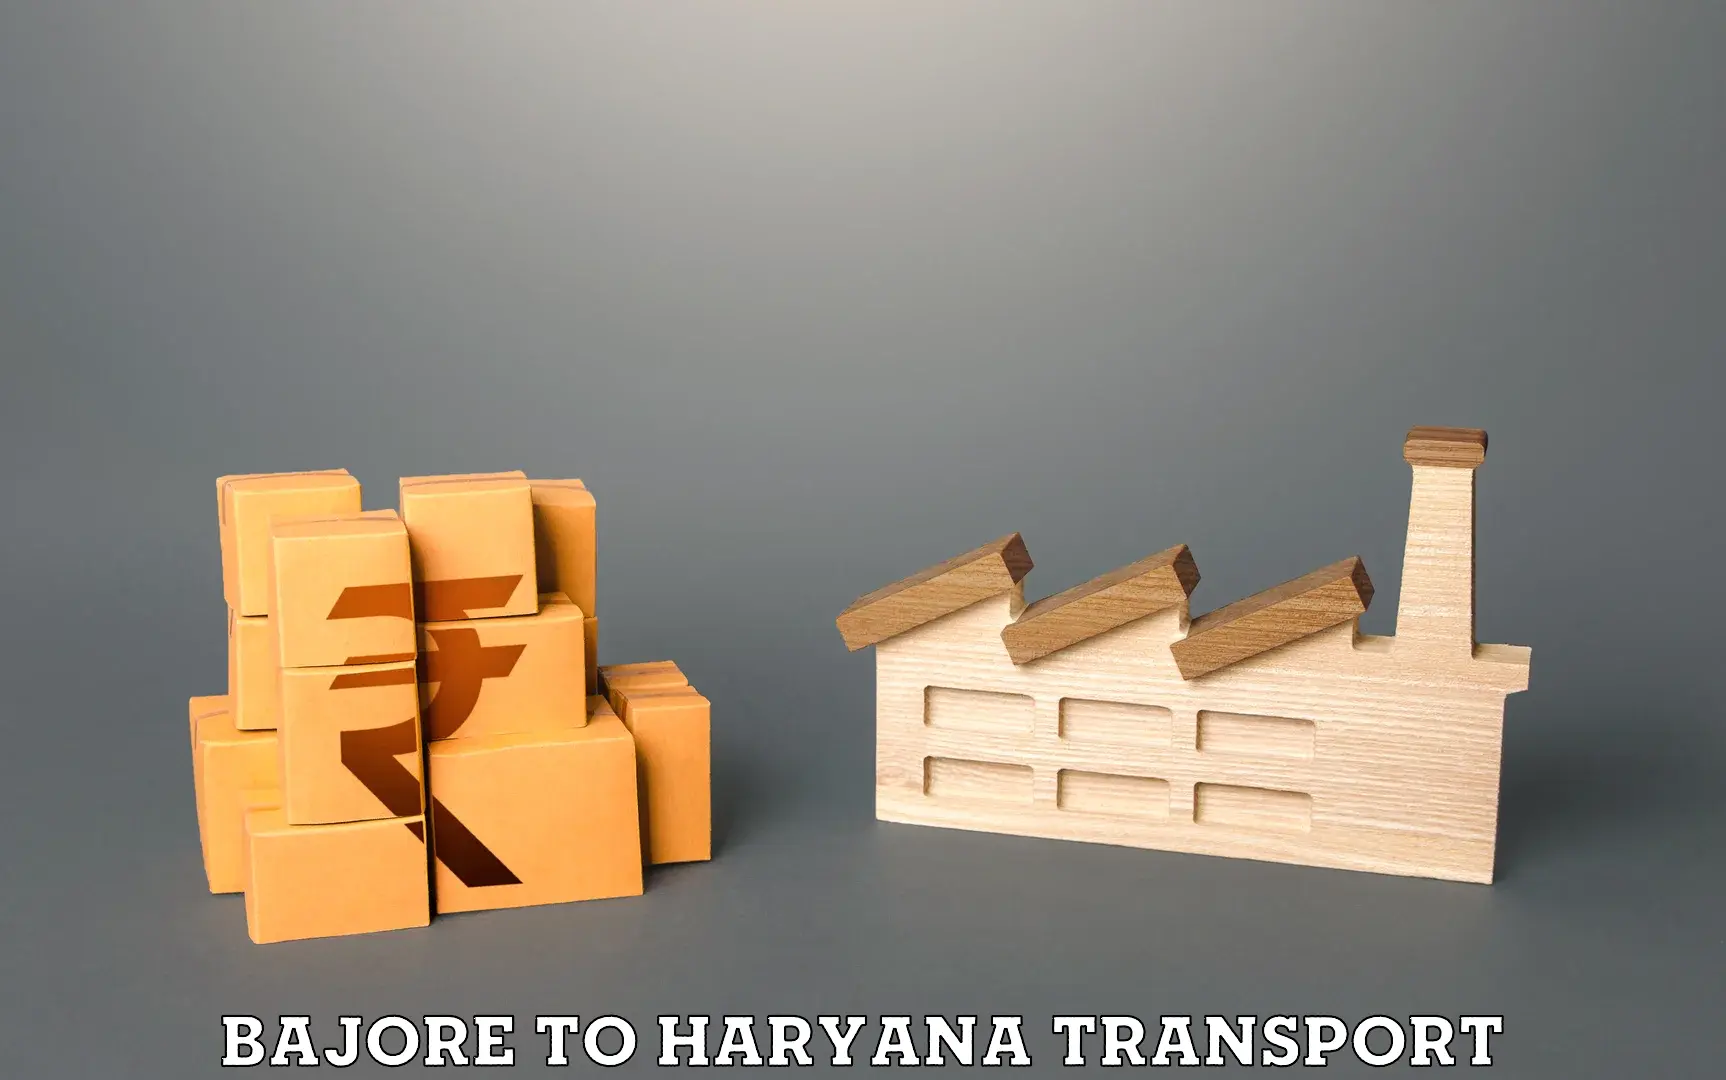 Commercial transport service Bajore to NCR Haryana